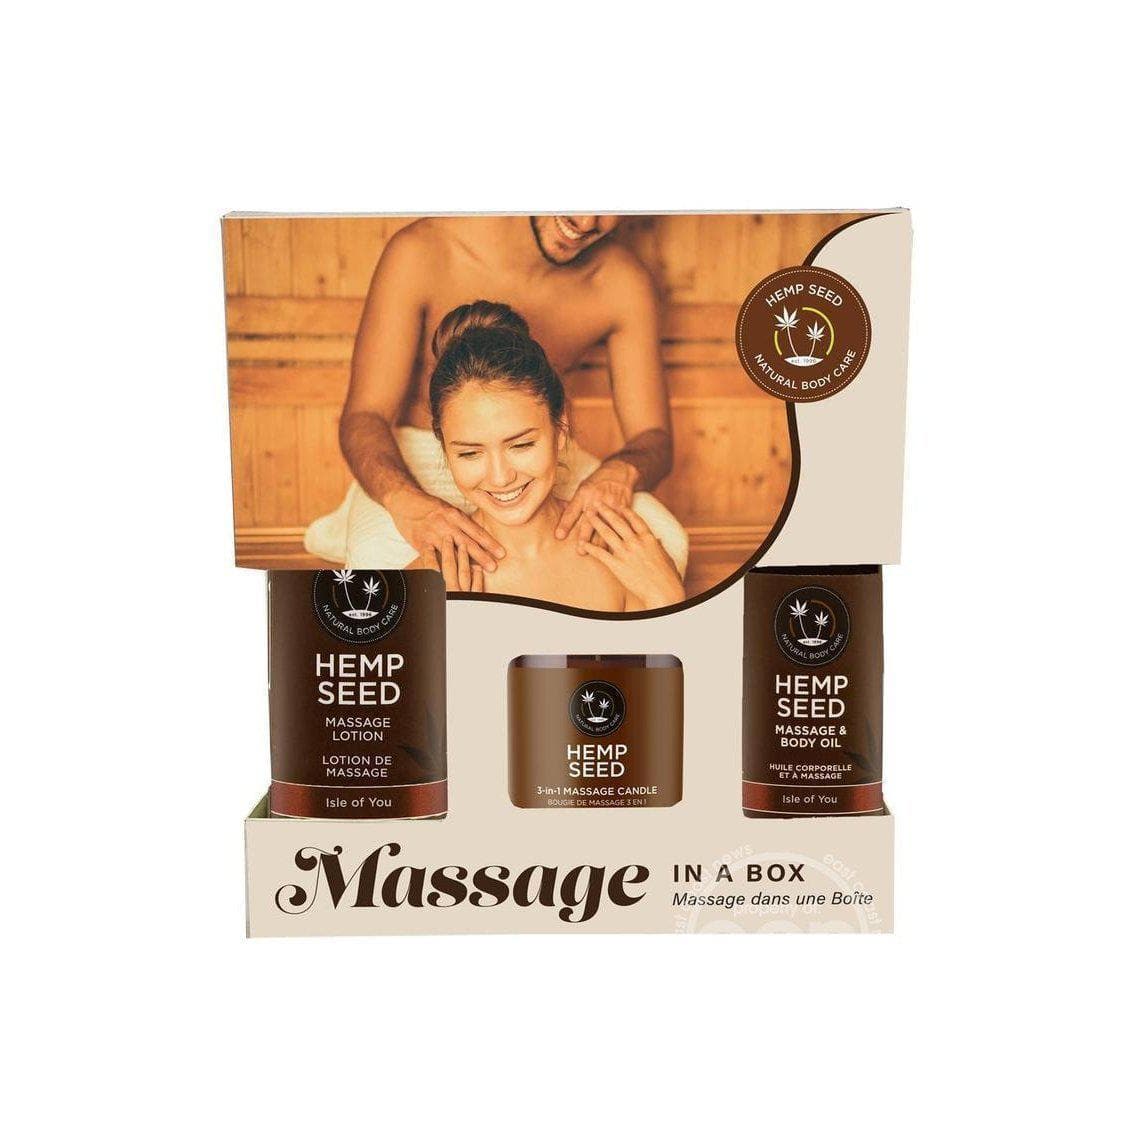 Earthly Body Hemp Seed Massage In A Box Gift Set - Isle Of You (set of 3) - Romantic Blessings